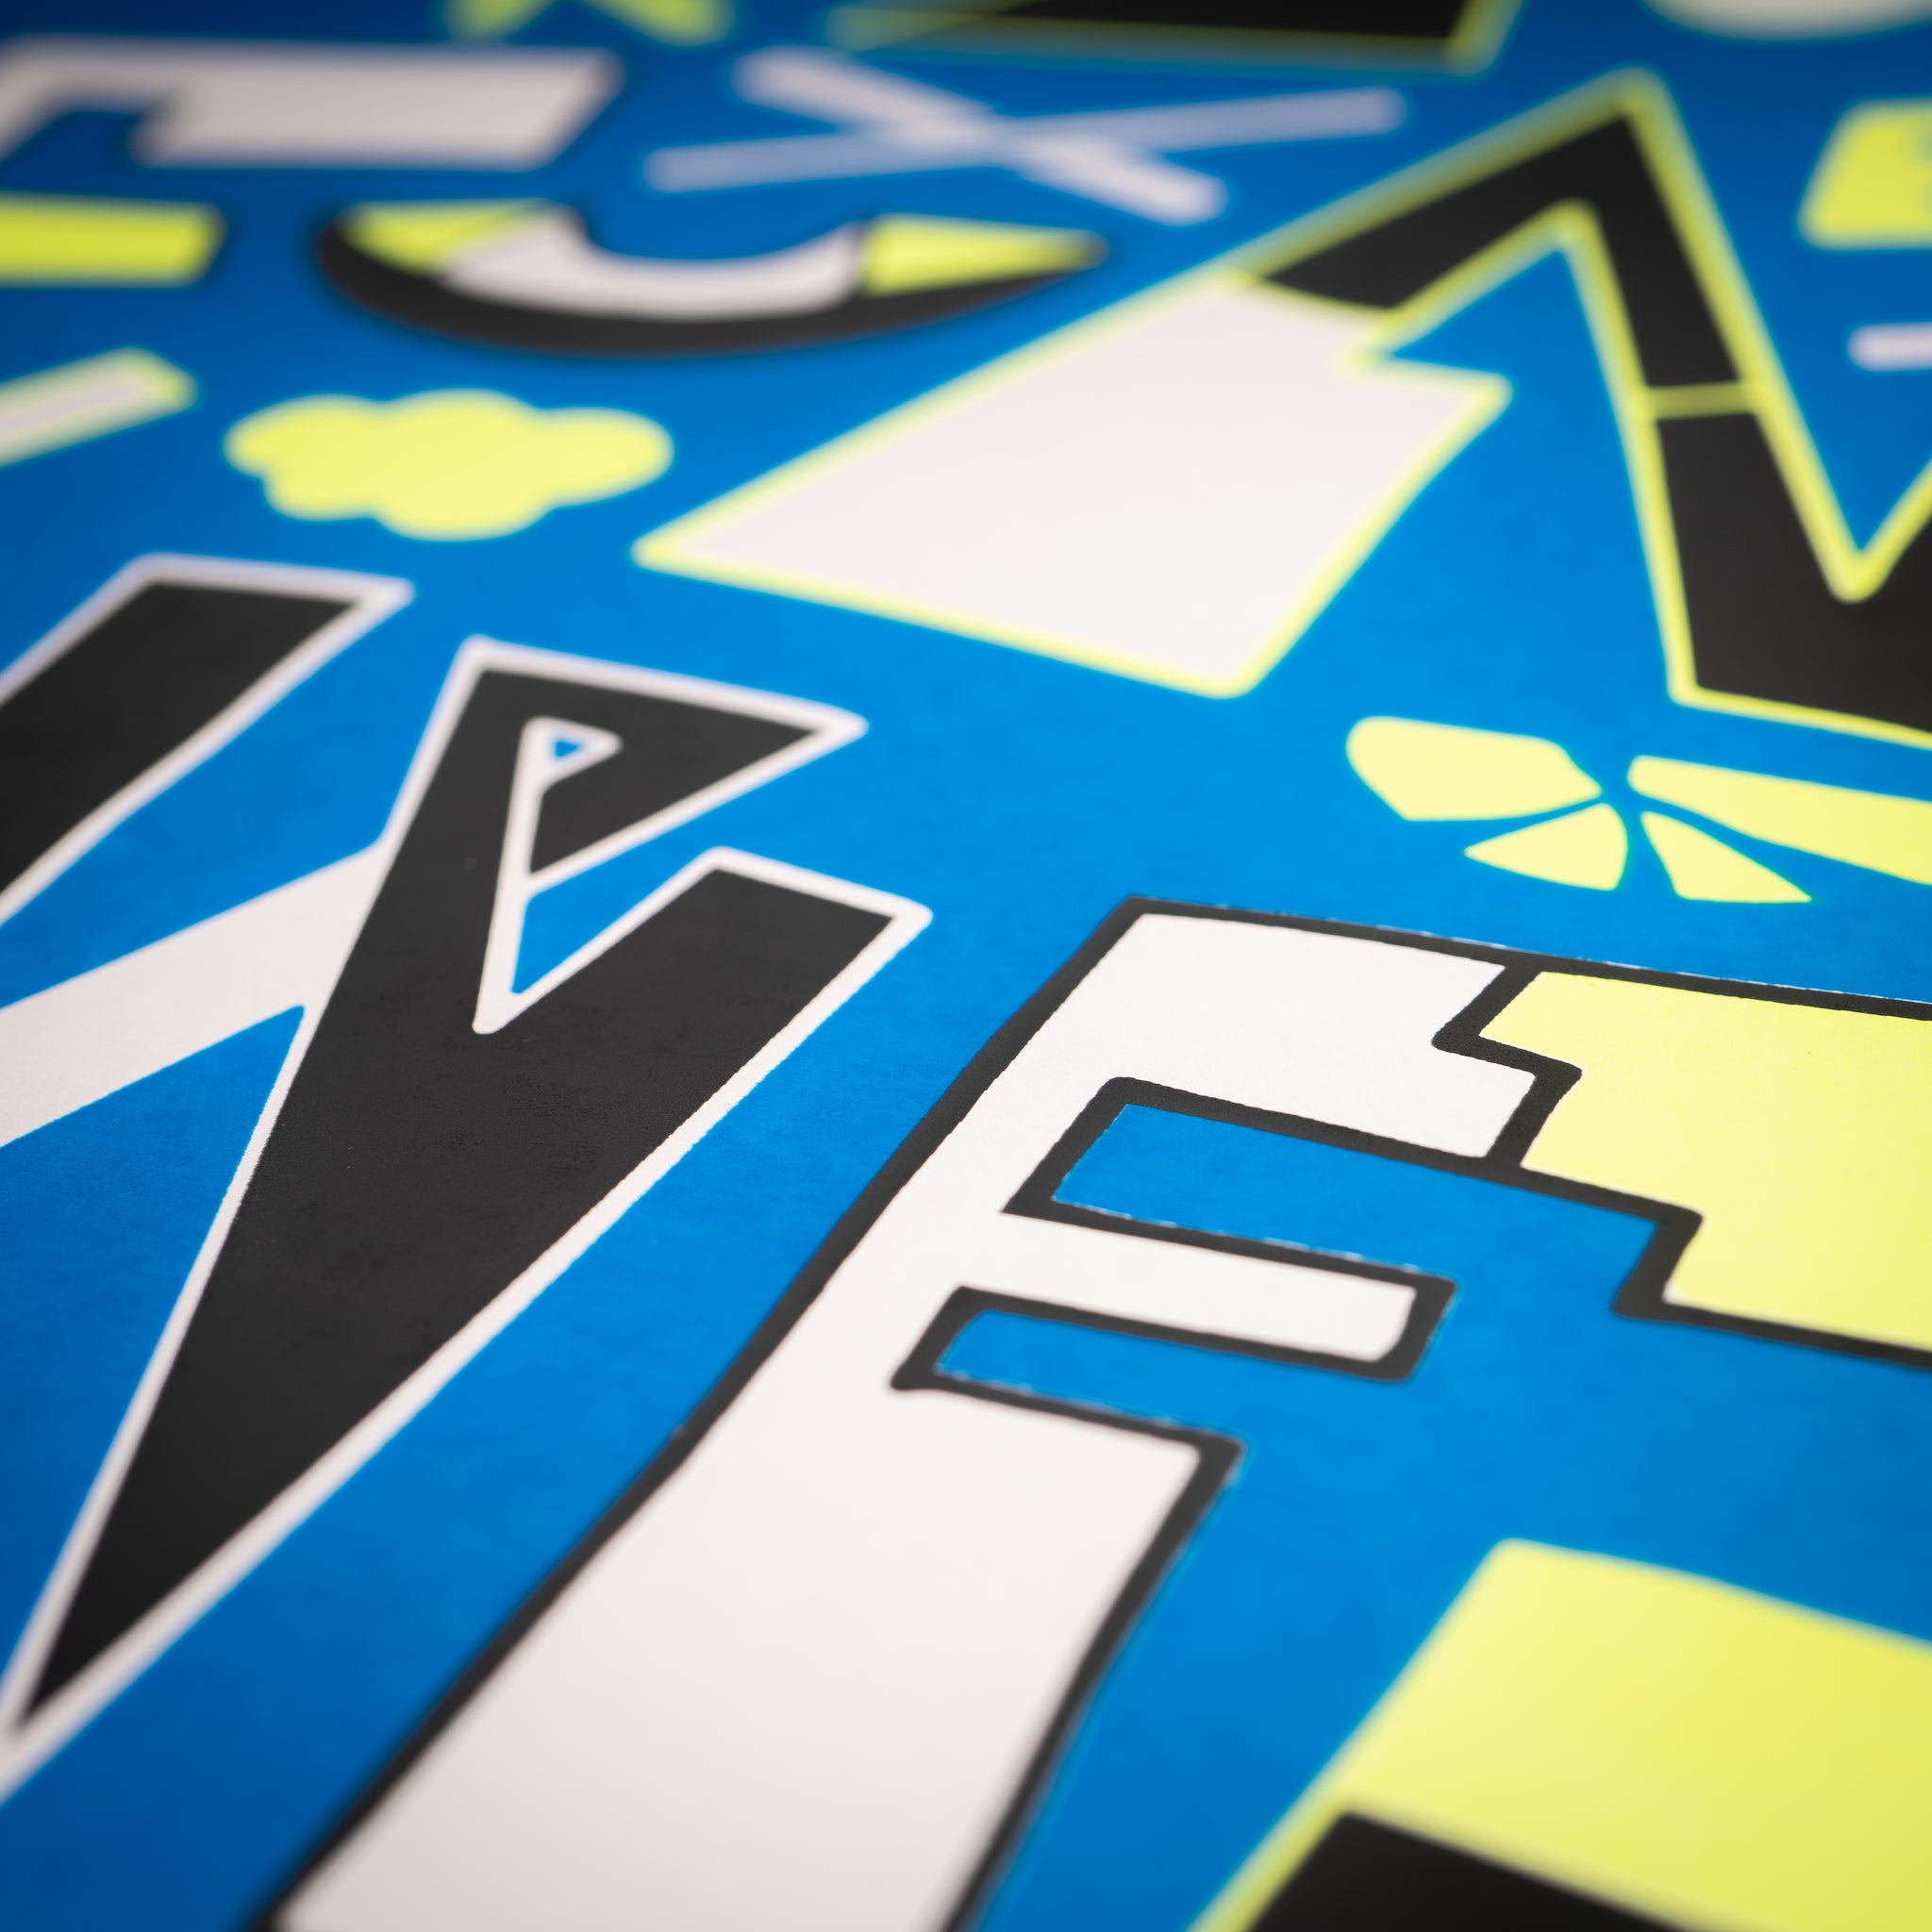 VeloPoster Original Screenprint Series - Cycling is Funkin' Awesome by Alphabad